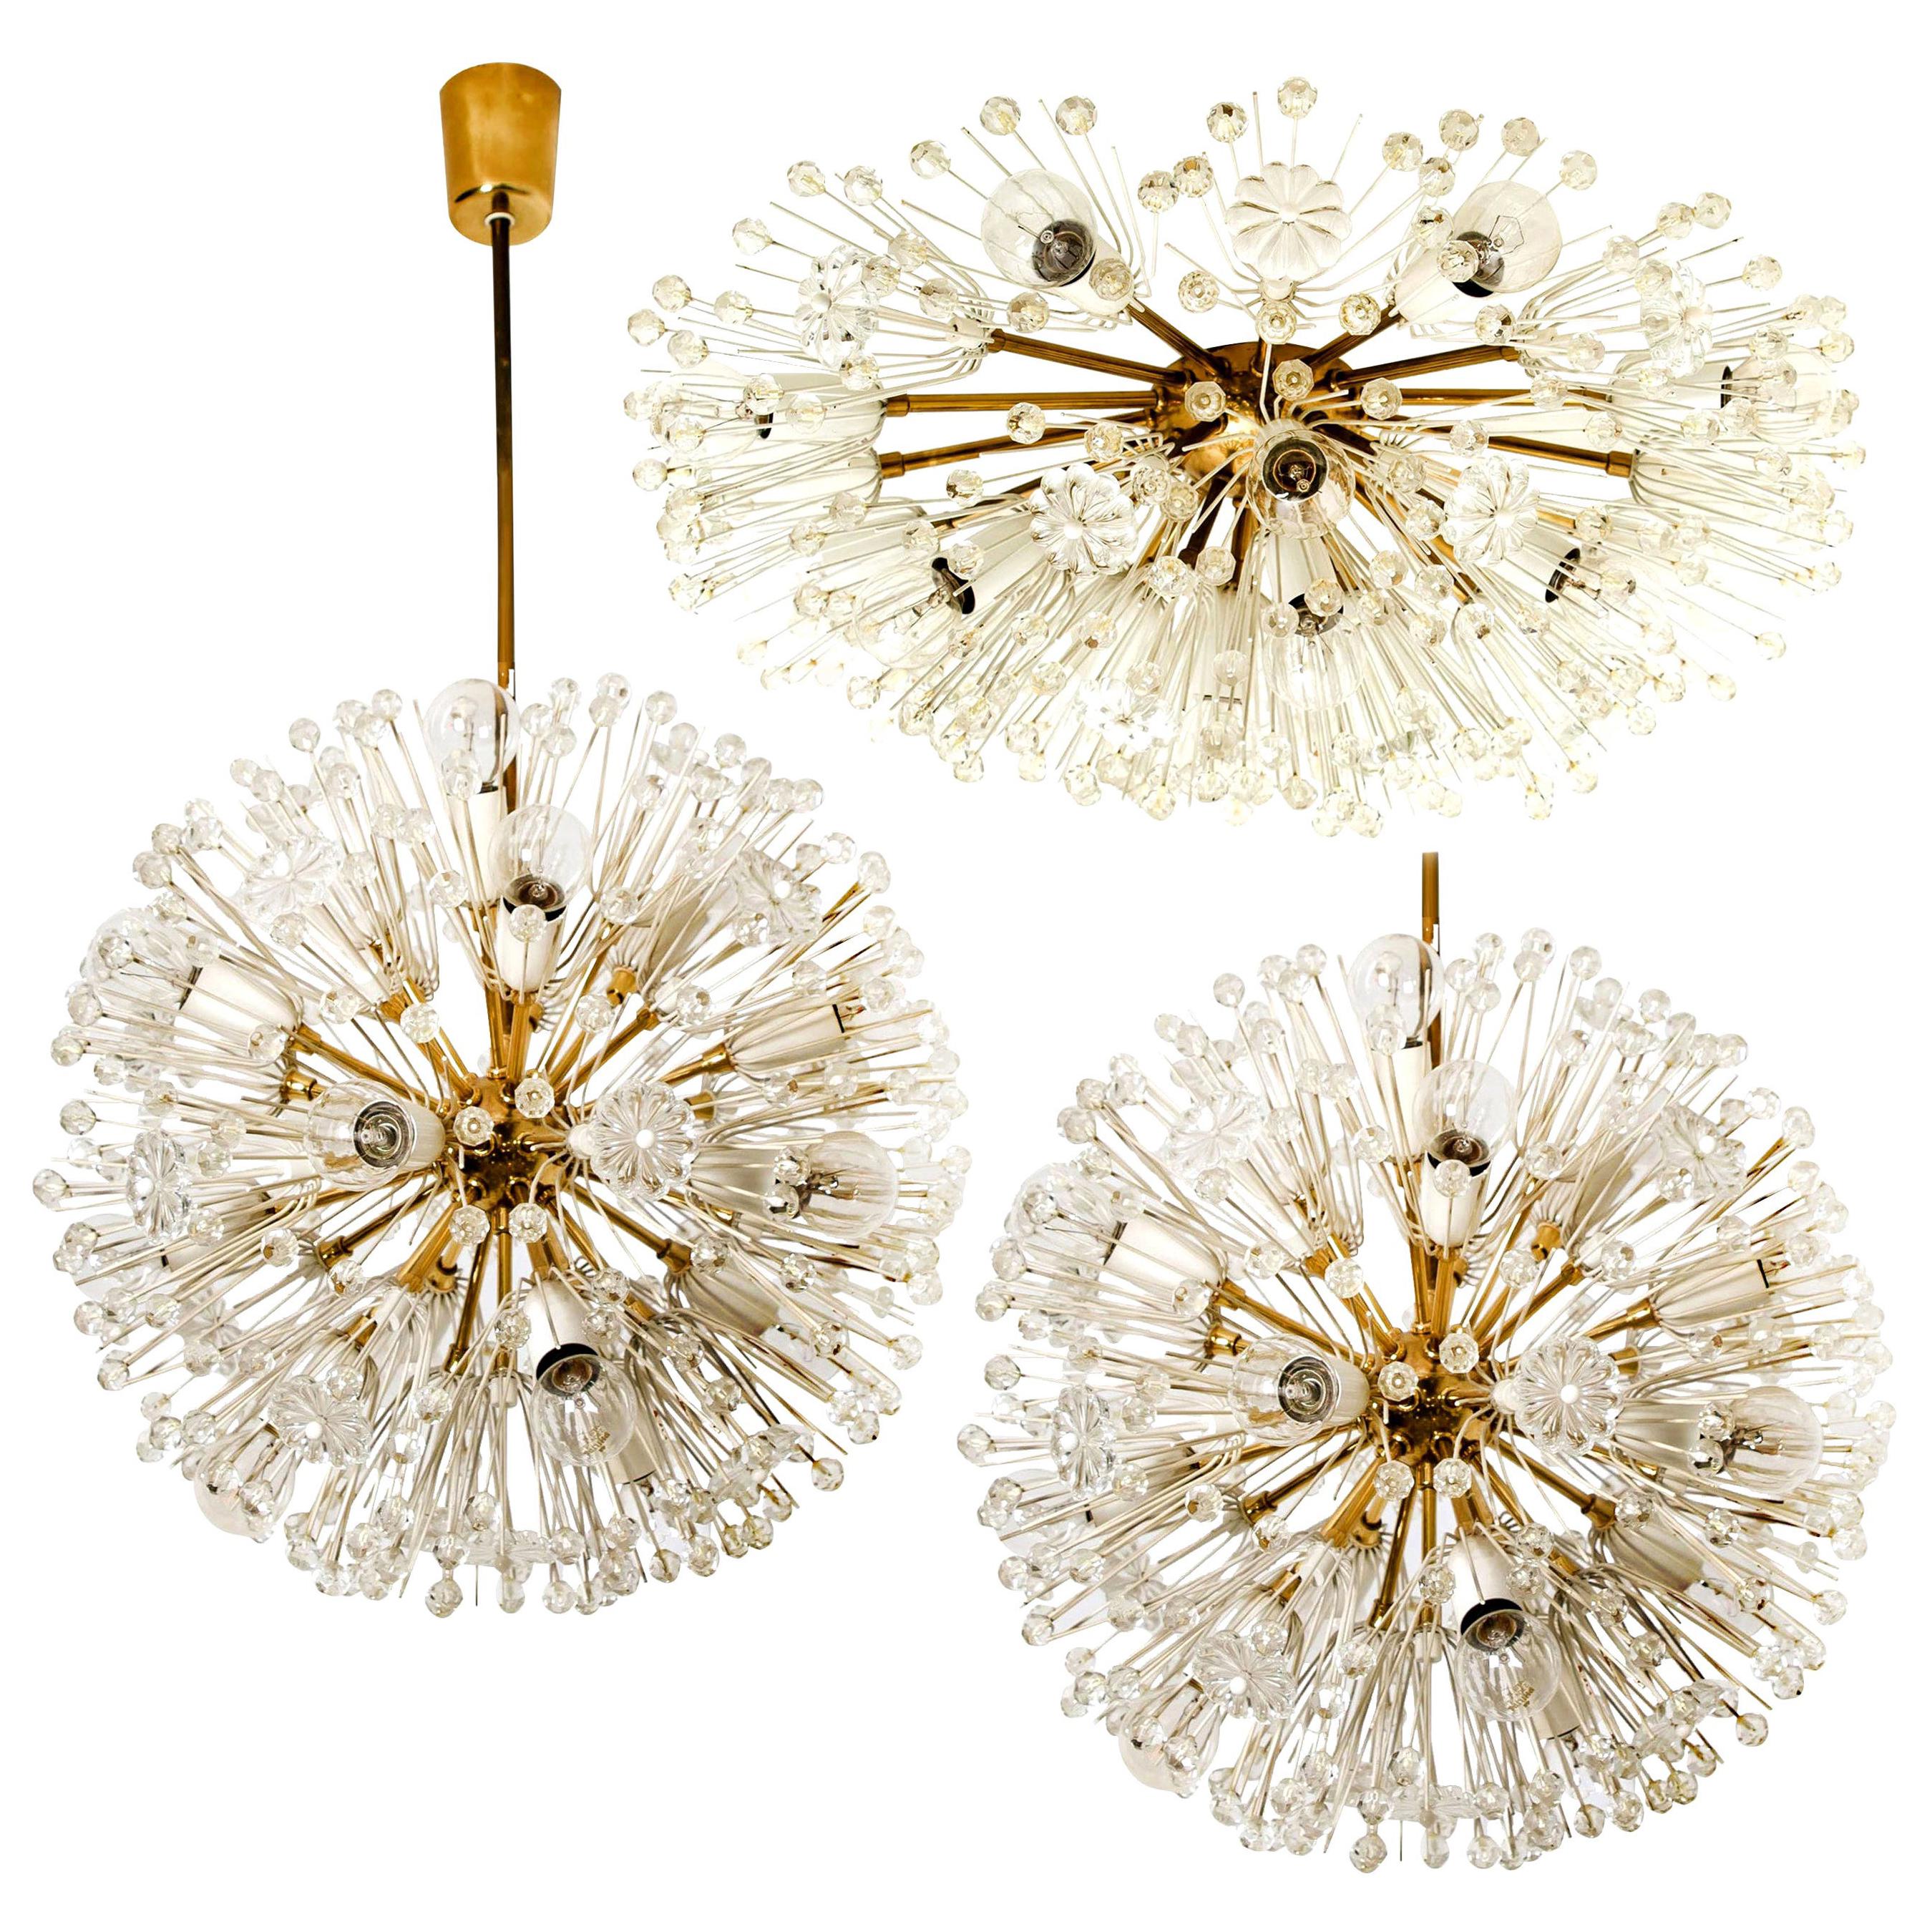 A magnificent set of light brass Sputnik fixtures with copious amounts of Austrian crystals by Emil Stejnar for Nikoll. Cosmological. 
This glamorous delicate brass ‘Snowball’ Sputnik light fixtures are also known as ‘pusteblume’ or ‘snowflake’ and